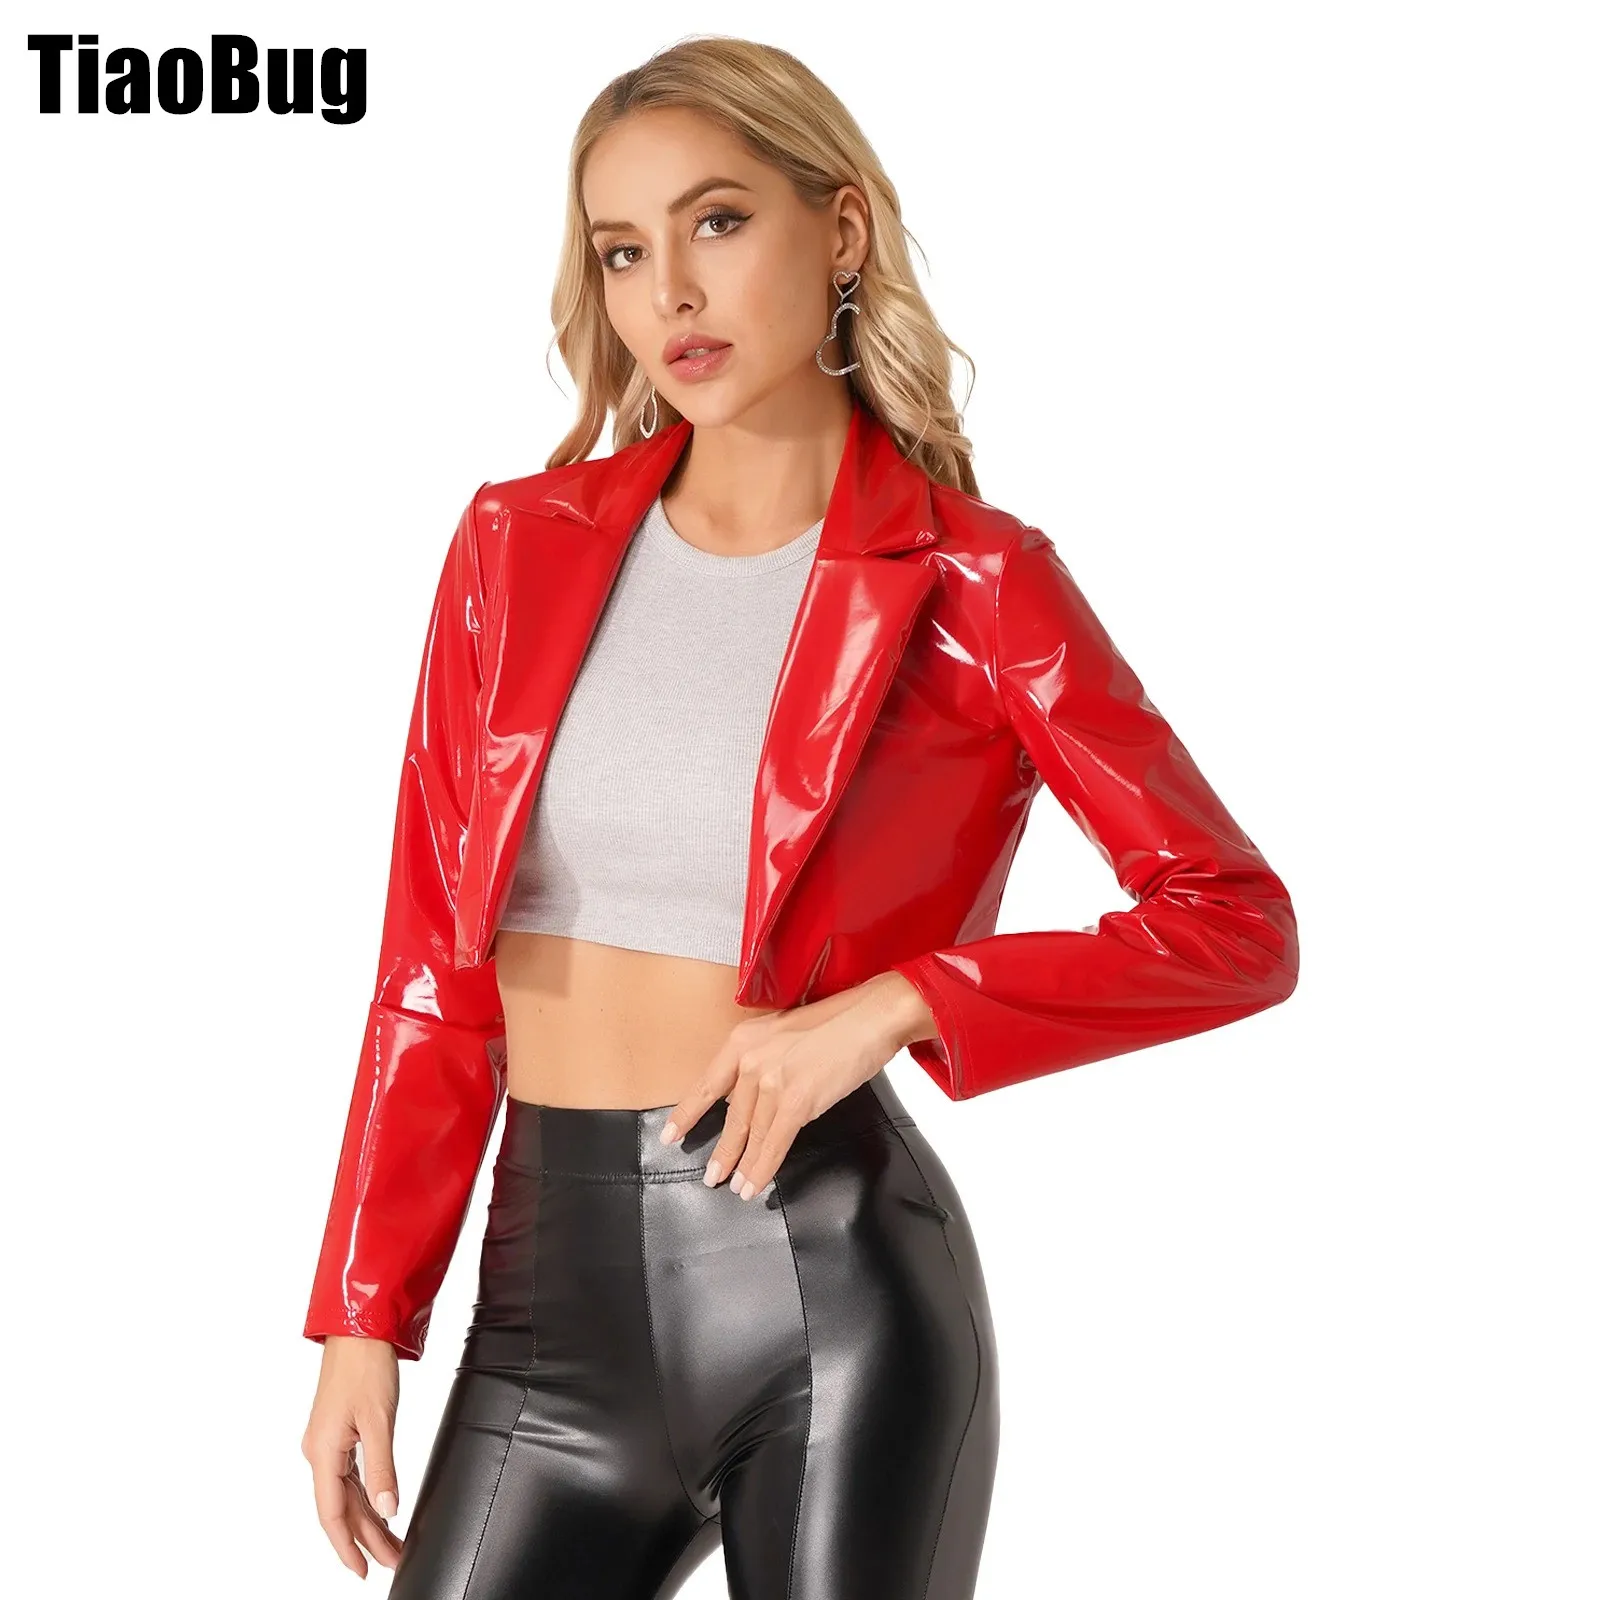 Womens Patent Leather Jacket Fashion Lapel Wet Look Long Sleeve Cropped Coat for Party Club Music Festival yuer 3x10w rgbw 4in1 cree lamp beads moving head beam light dmx512 15ch for dj disco stage music party lighting shows indoor bar